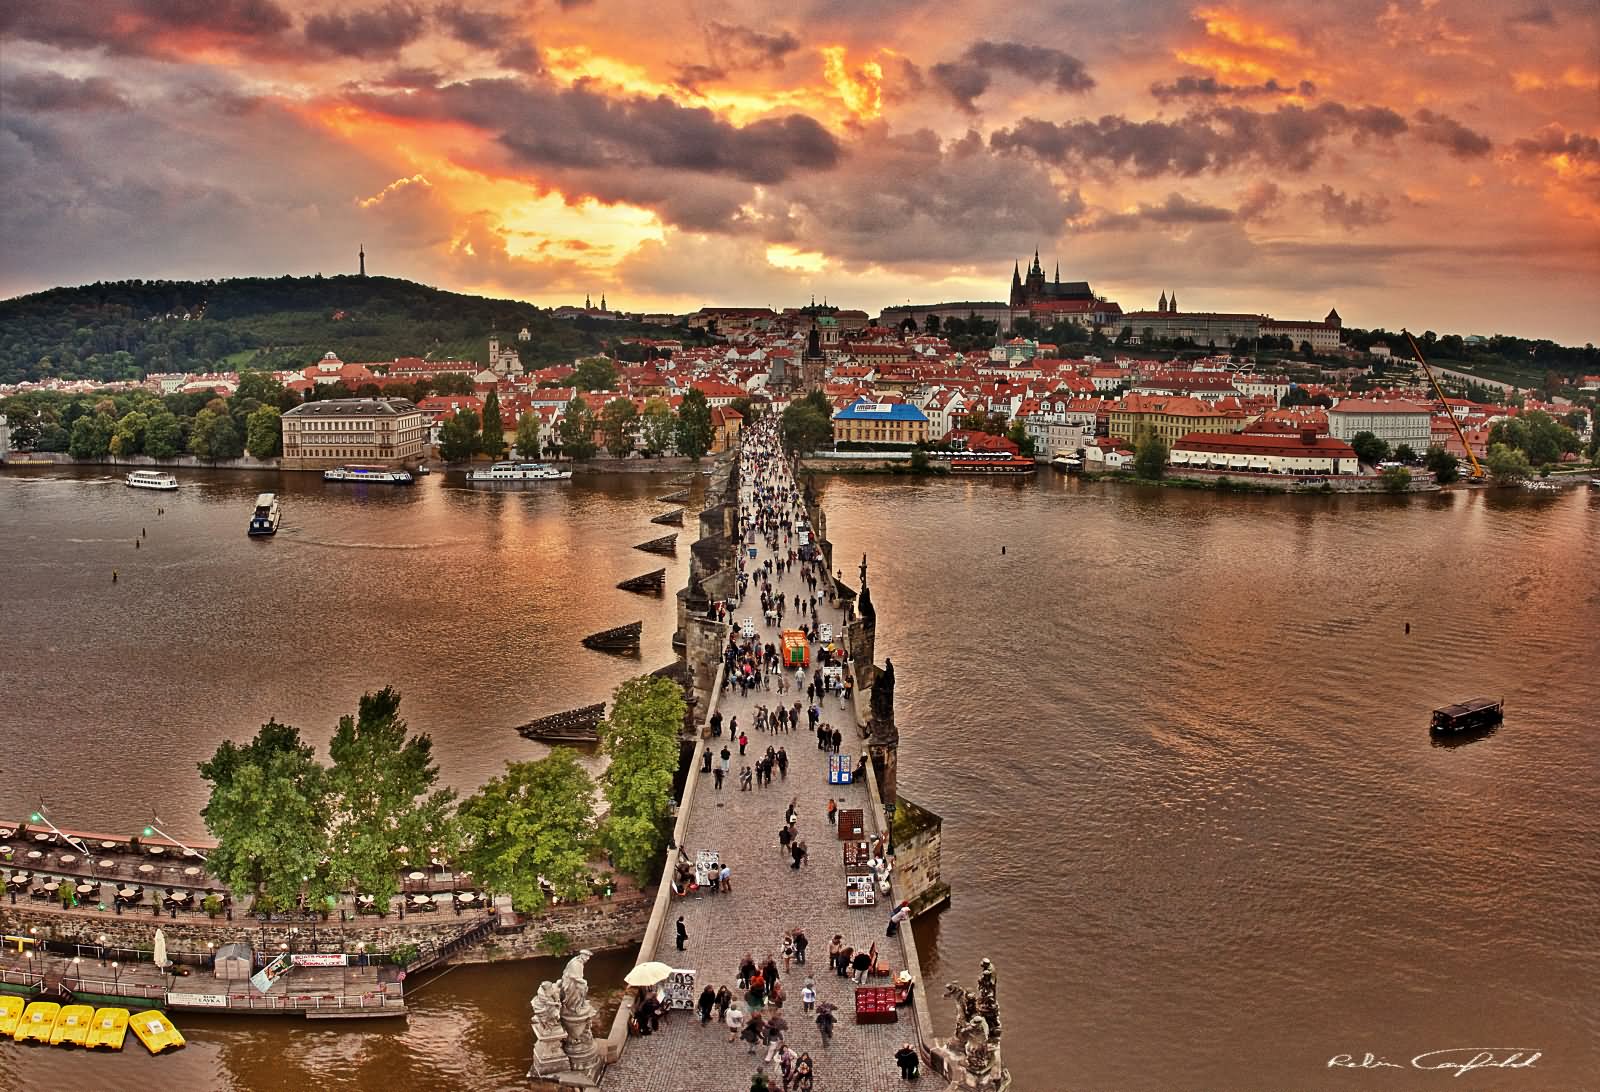 20 Amazing Sunset View Pictures And Images Of Charles Bridge